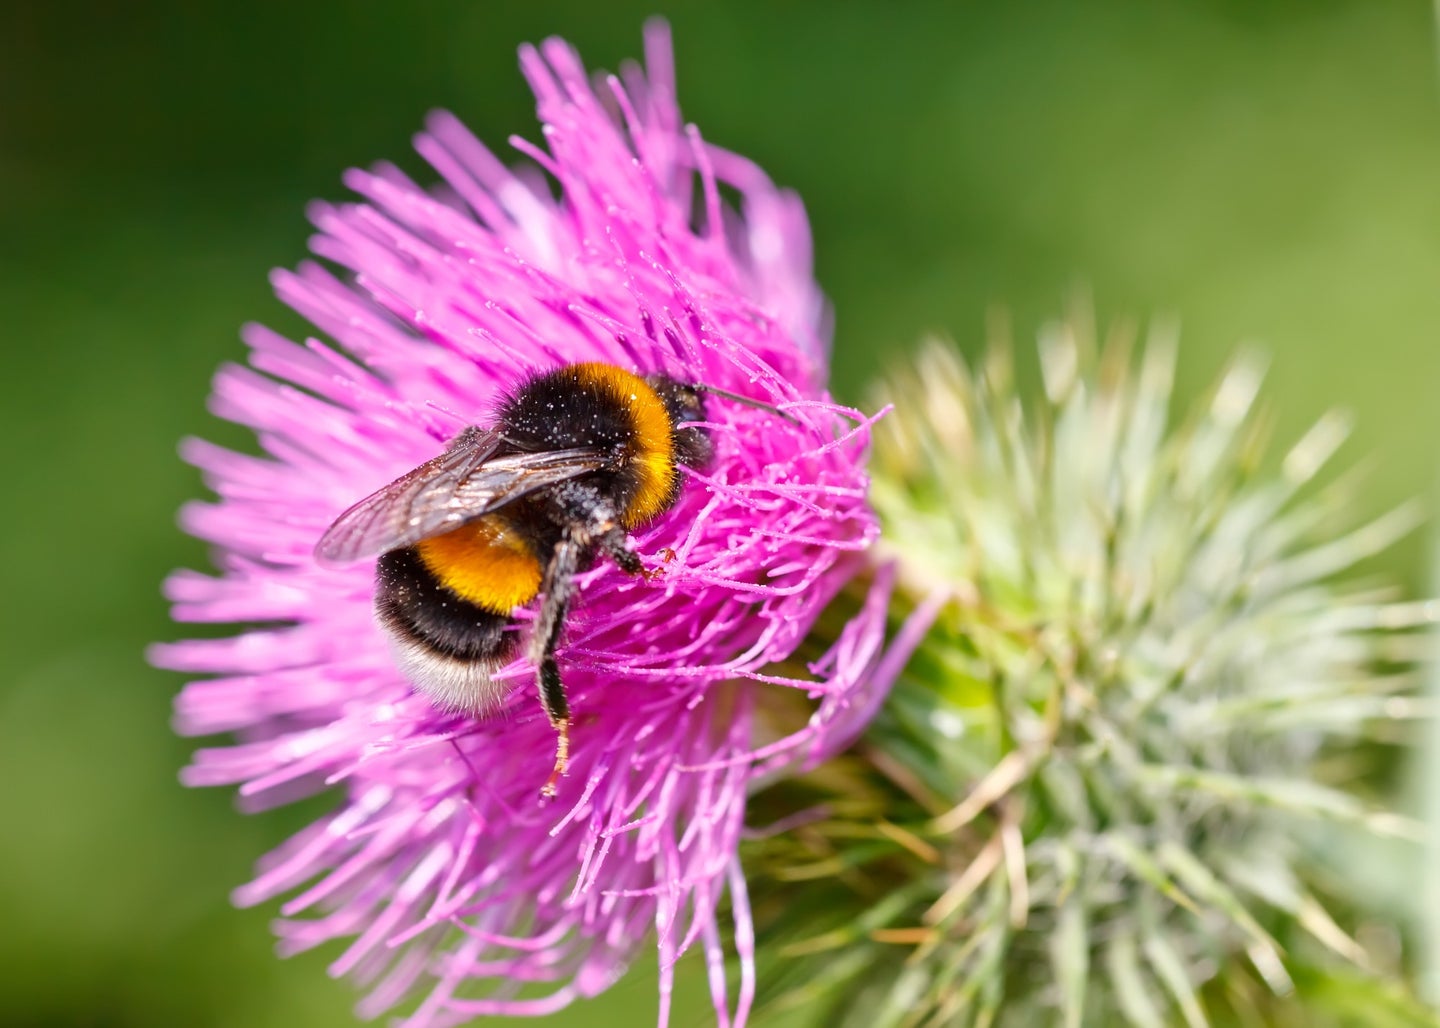 Sixty-six bumblebee species are in decline in North America and Europe.